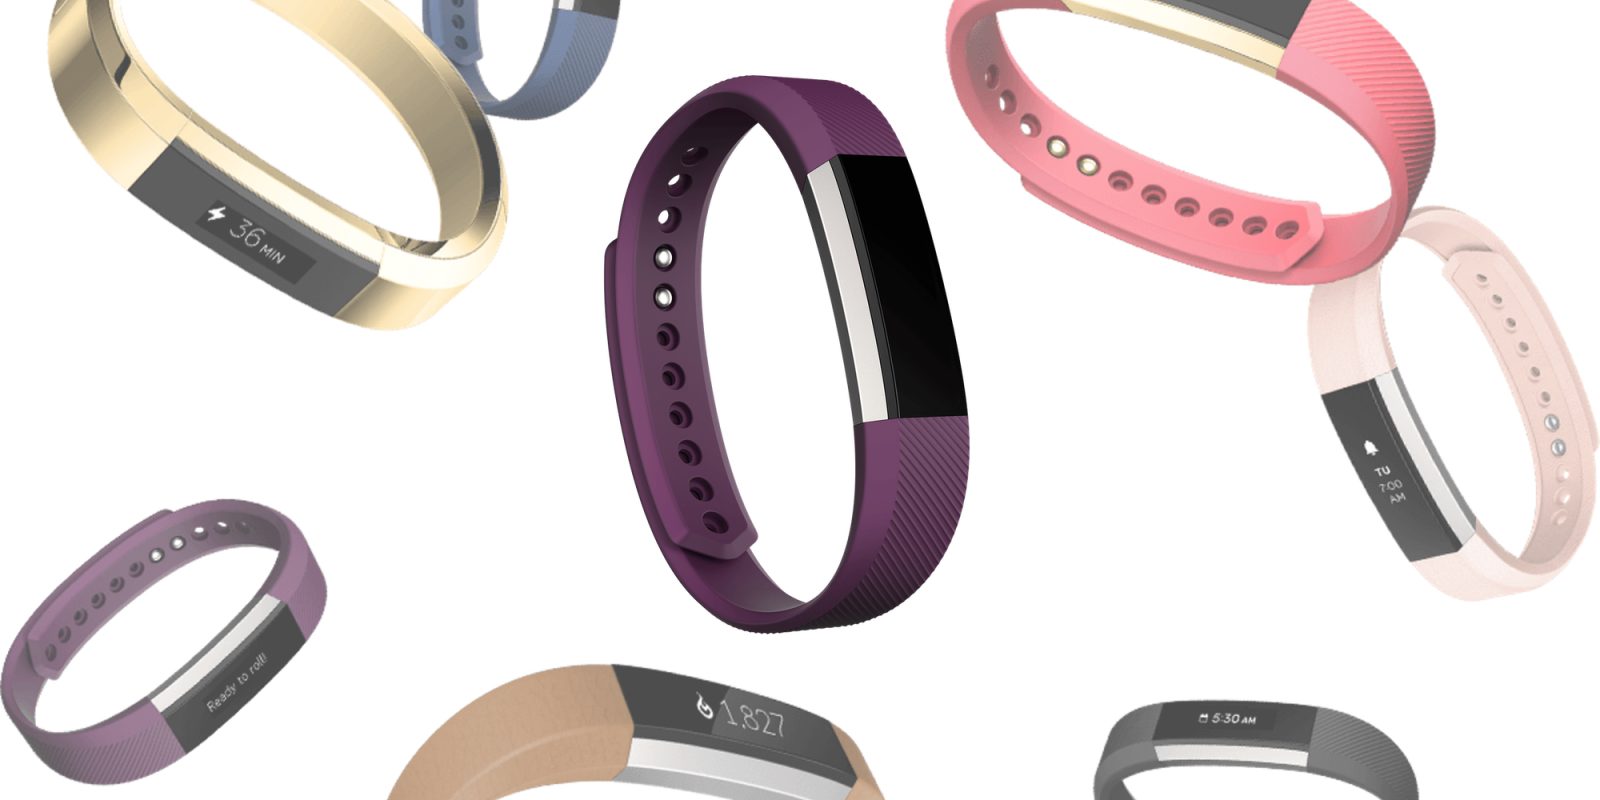 Sleep tracking and seven-day battery life highlight the Fitbit Alta HR ...